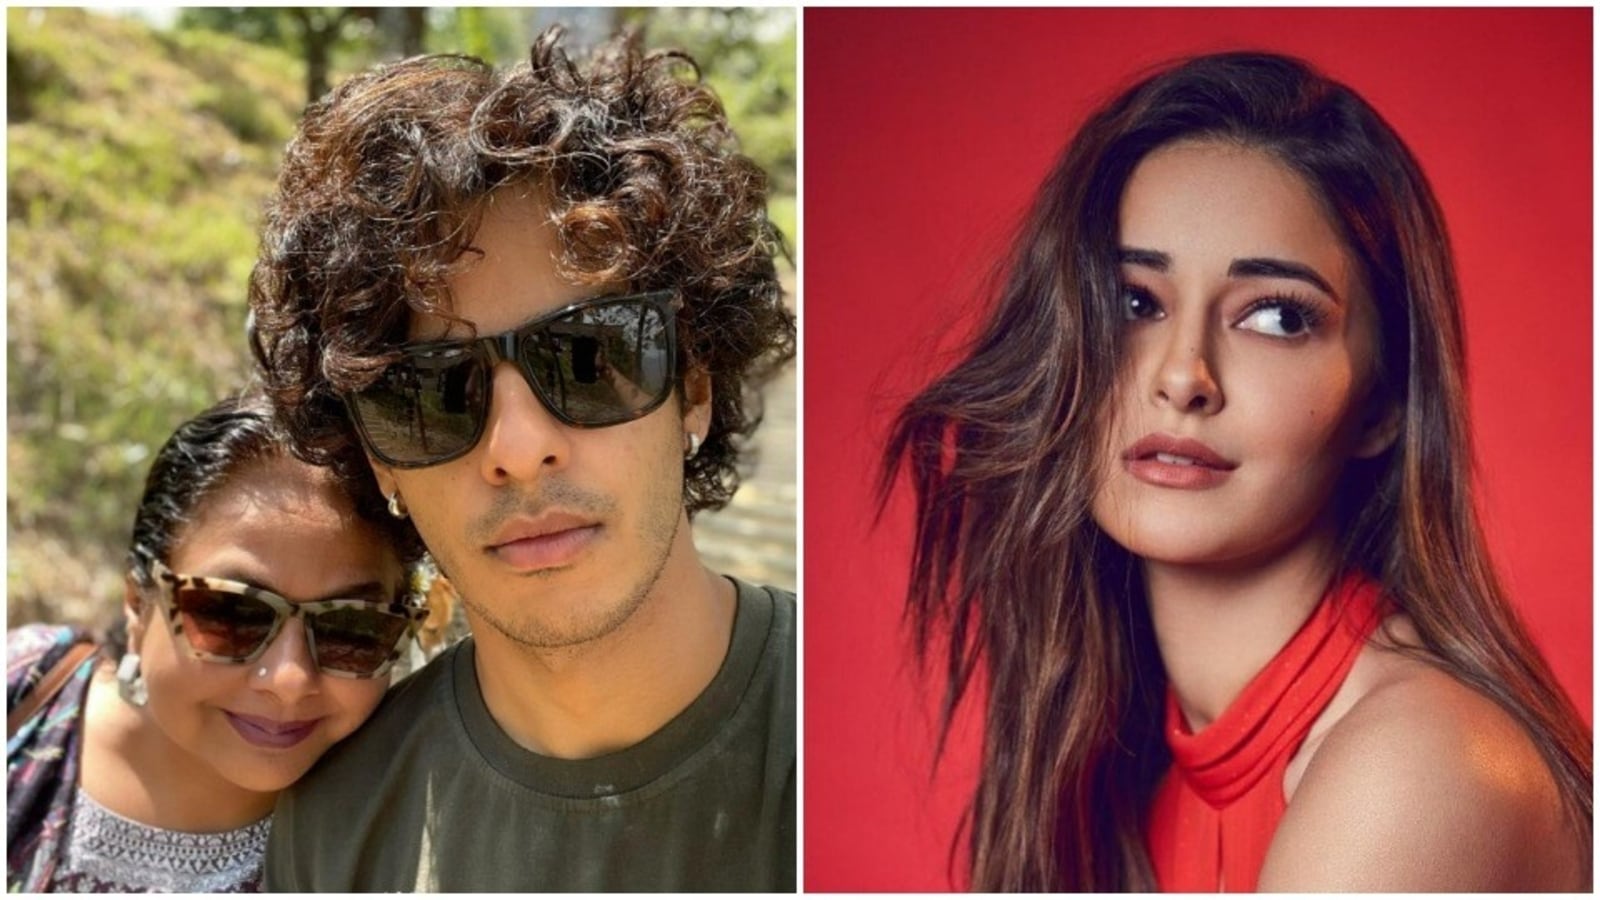 Ishaan Khatter’s mom Neliima Azeem calls Ananya Panday part of ‘family circle’ and ‘an important part’ of his life